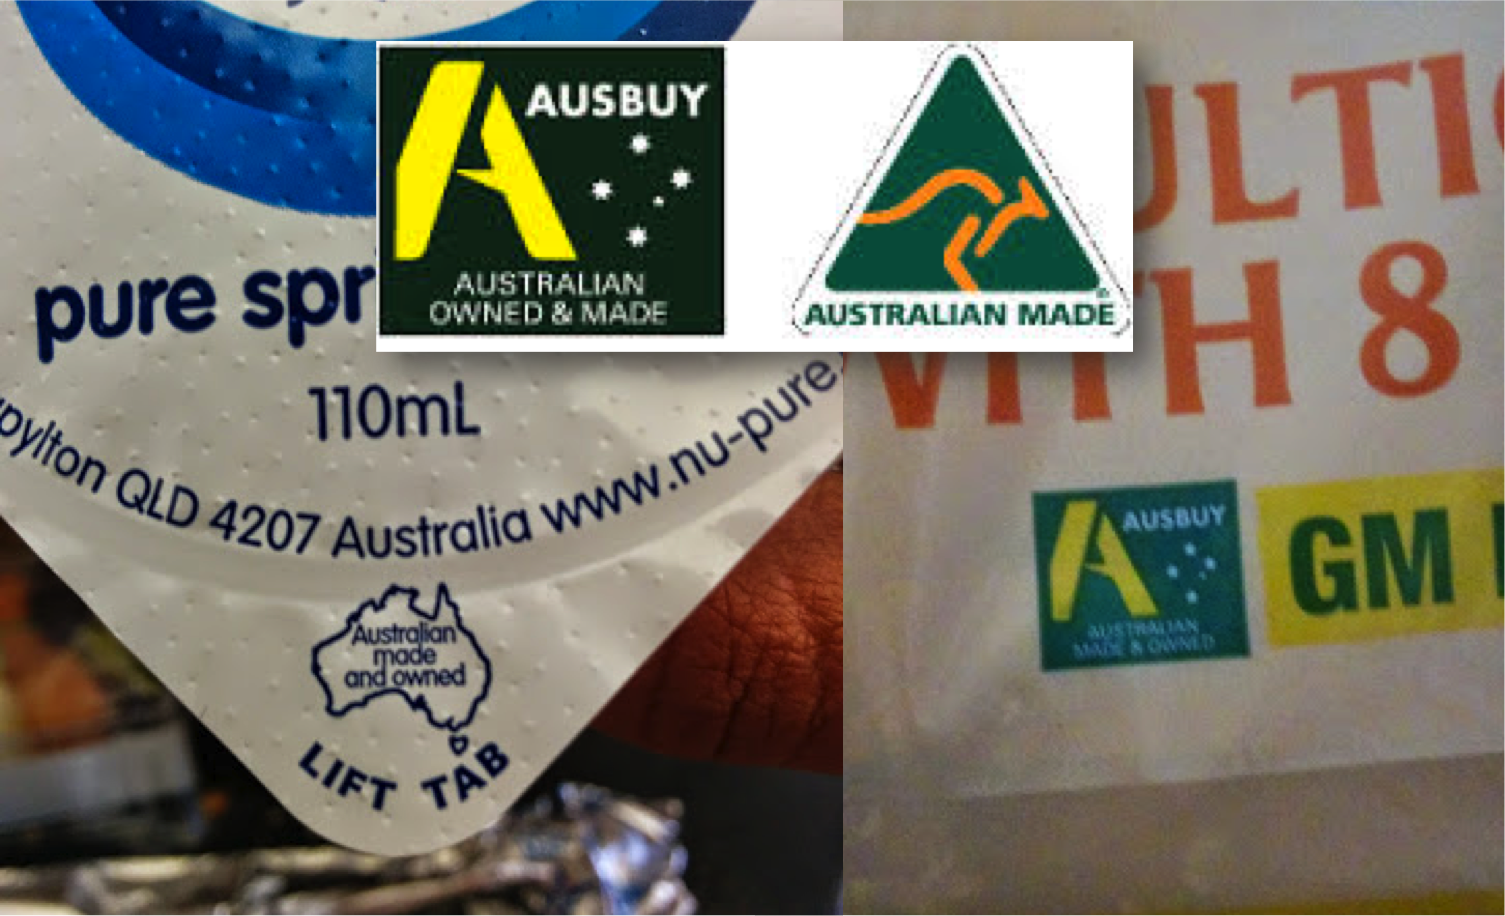 Promotion of products made in Australia